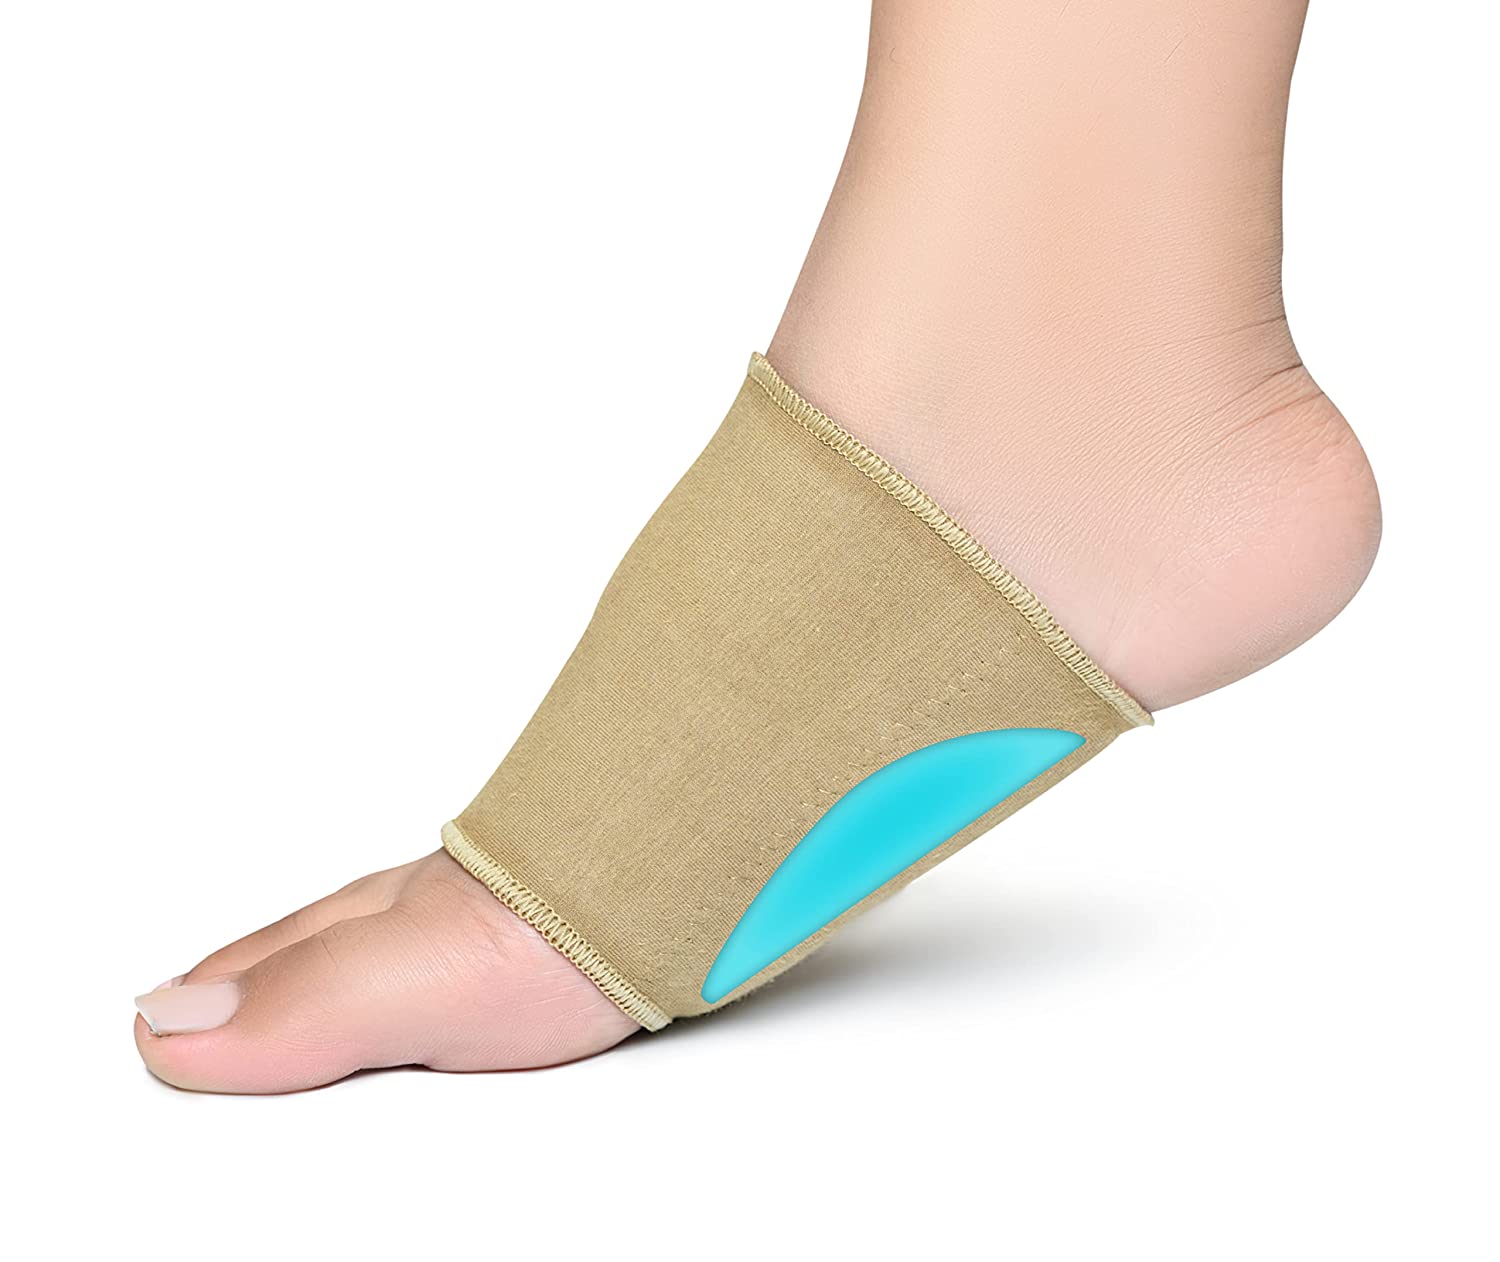 Strutz Cushioned Arch Foot Heel Support Decrease Plantar Fasciitis Pain  Relief Insole Pads Shock Absorber Foot Treatment DHL Free From Beauty_rose,  $0.76 | DHgate.Com